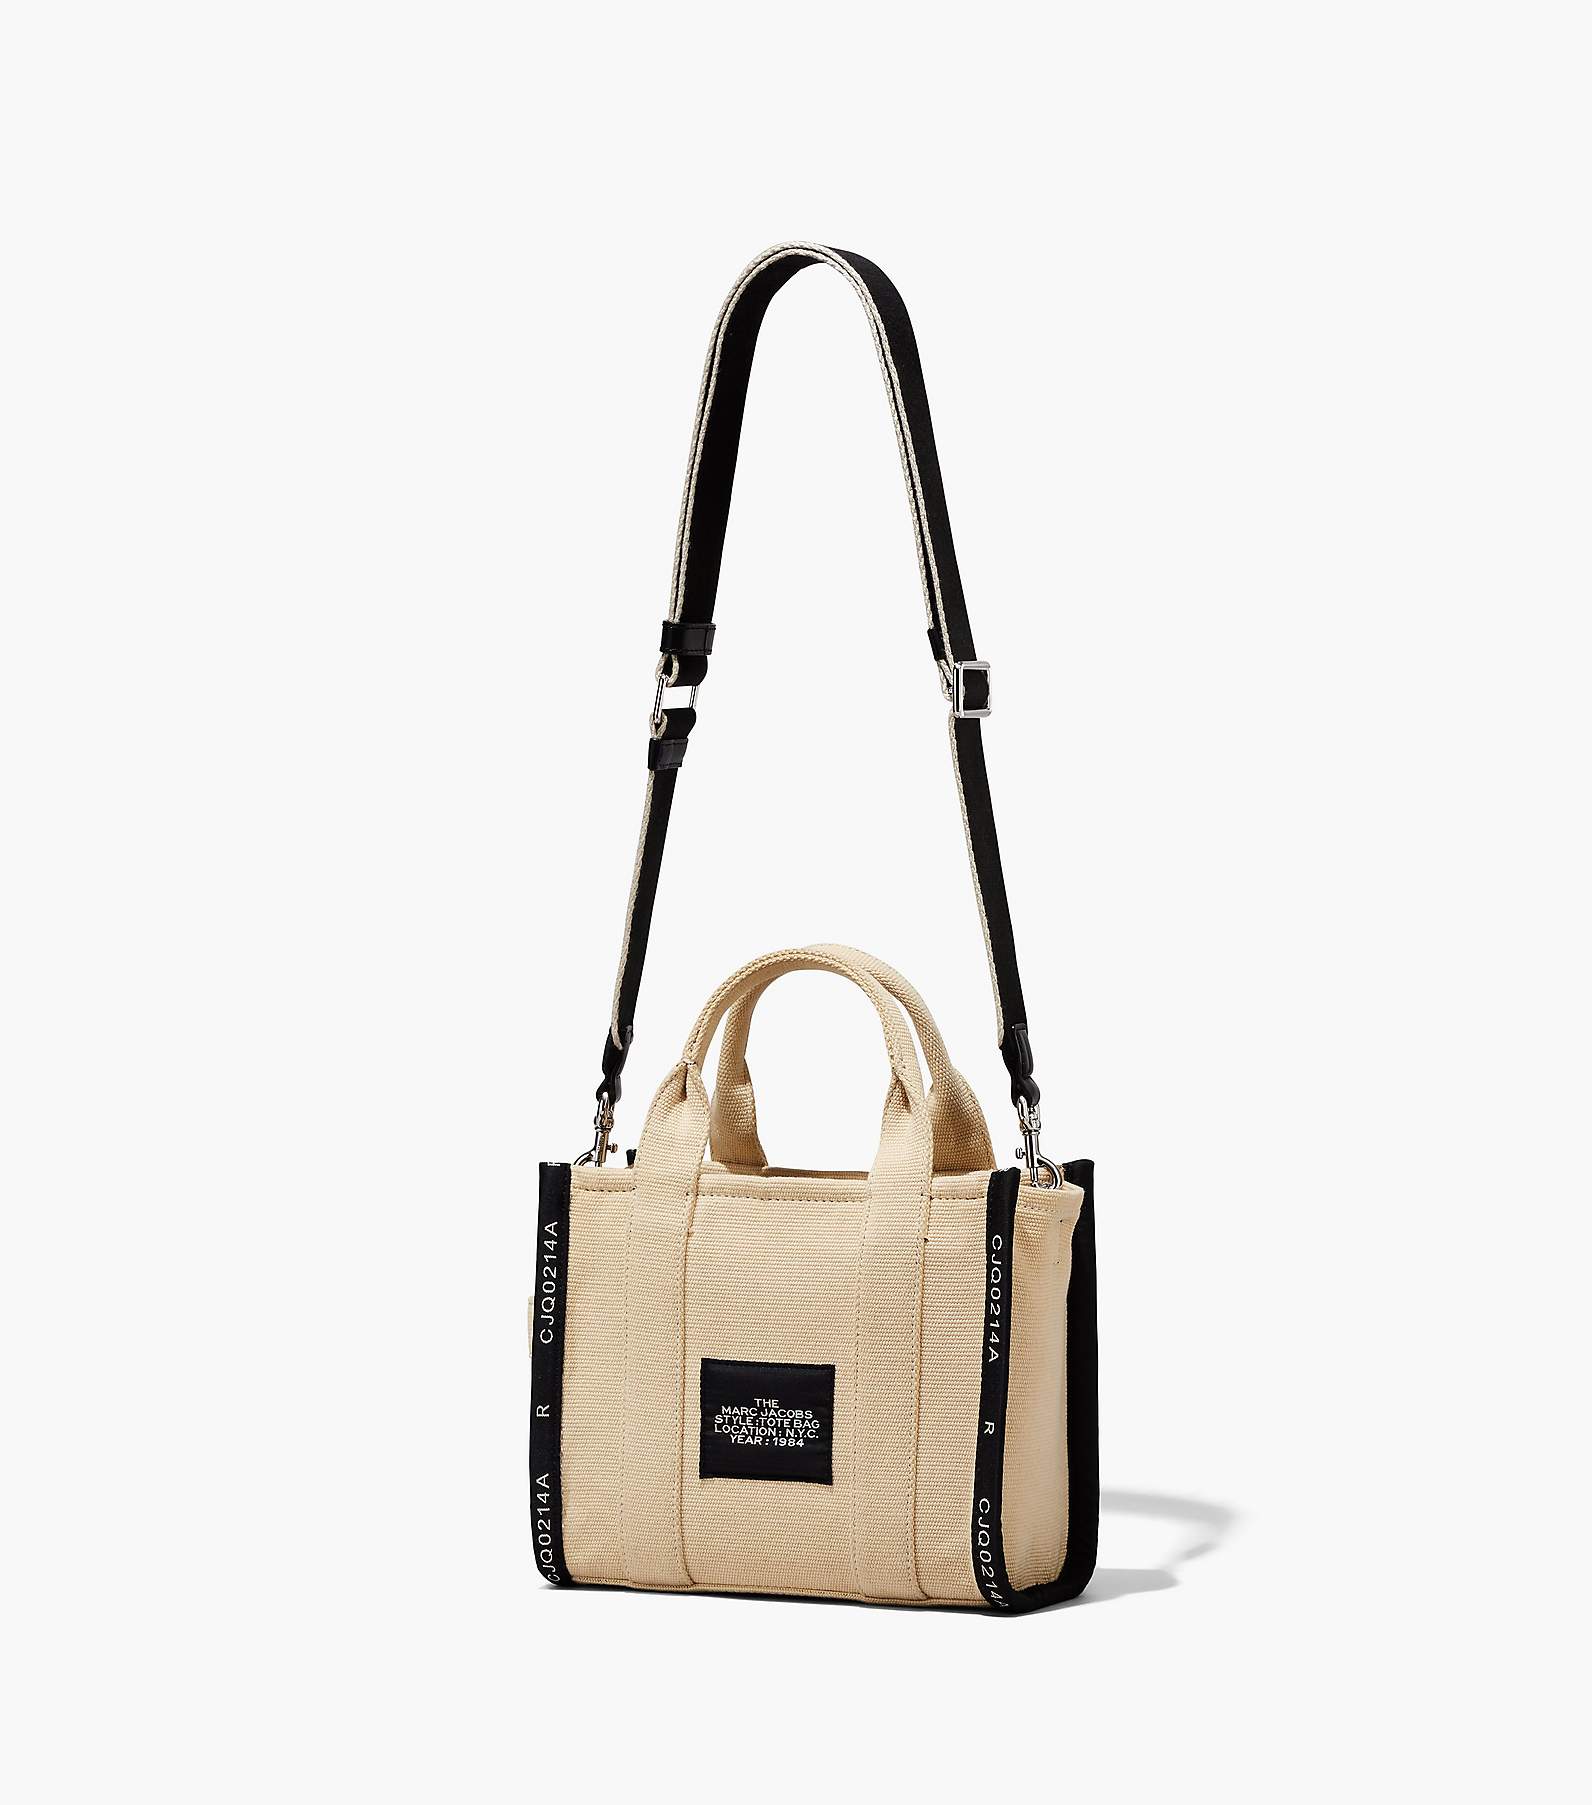 The Jacquard Small Tote Bag   Marc Jacobs   Official Site